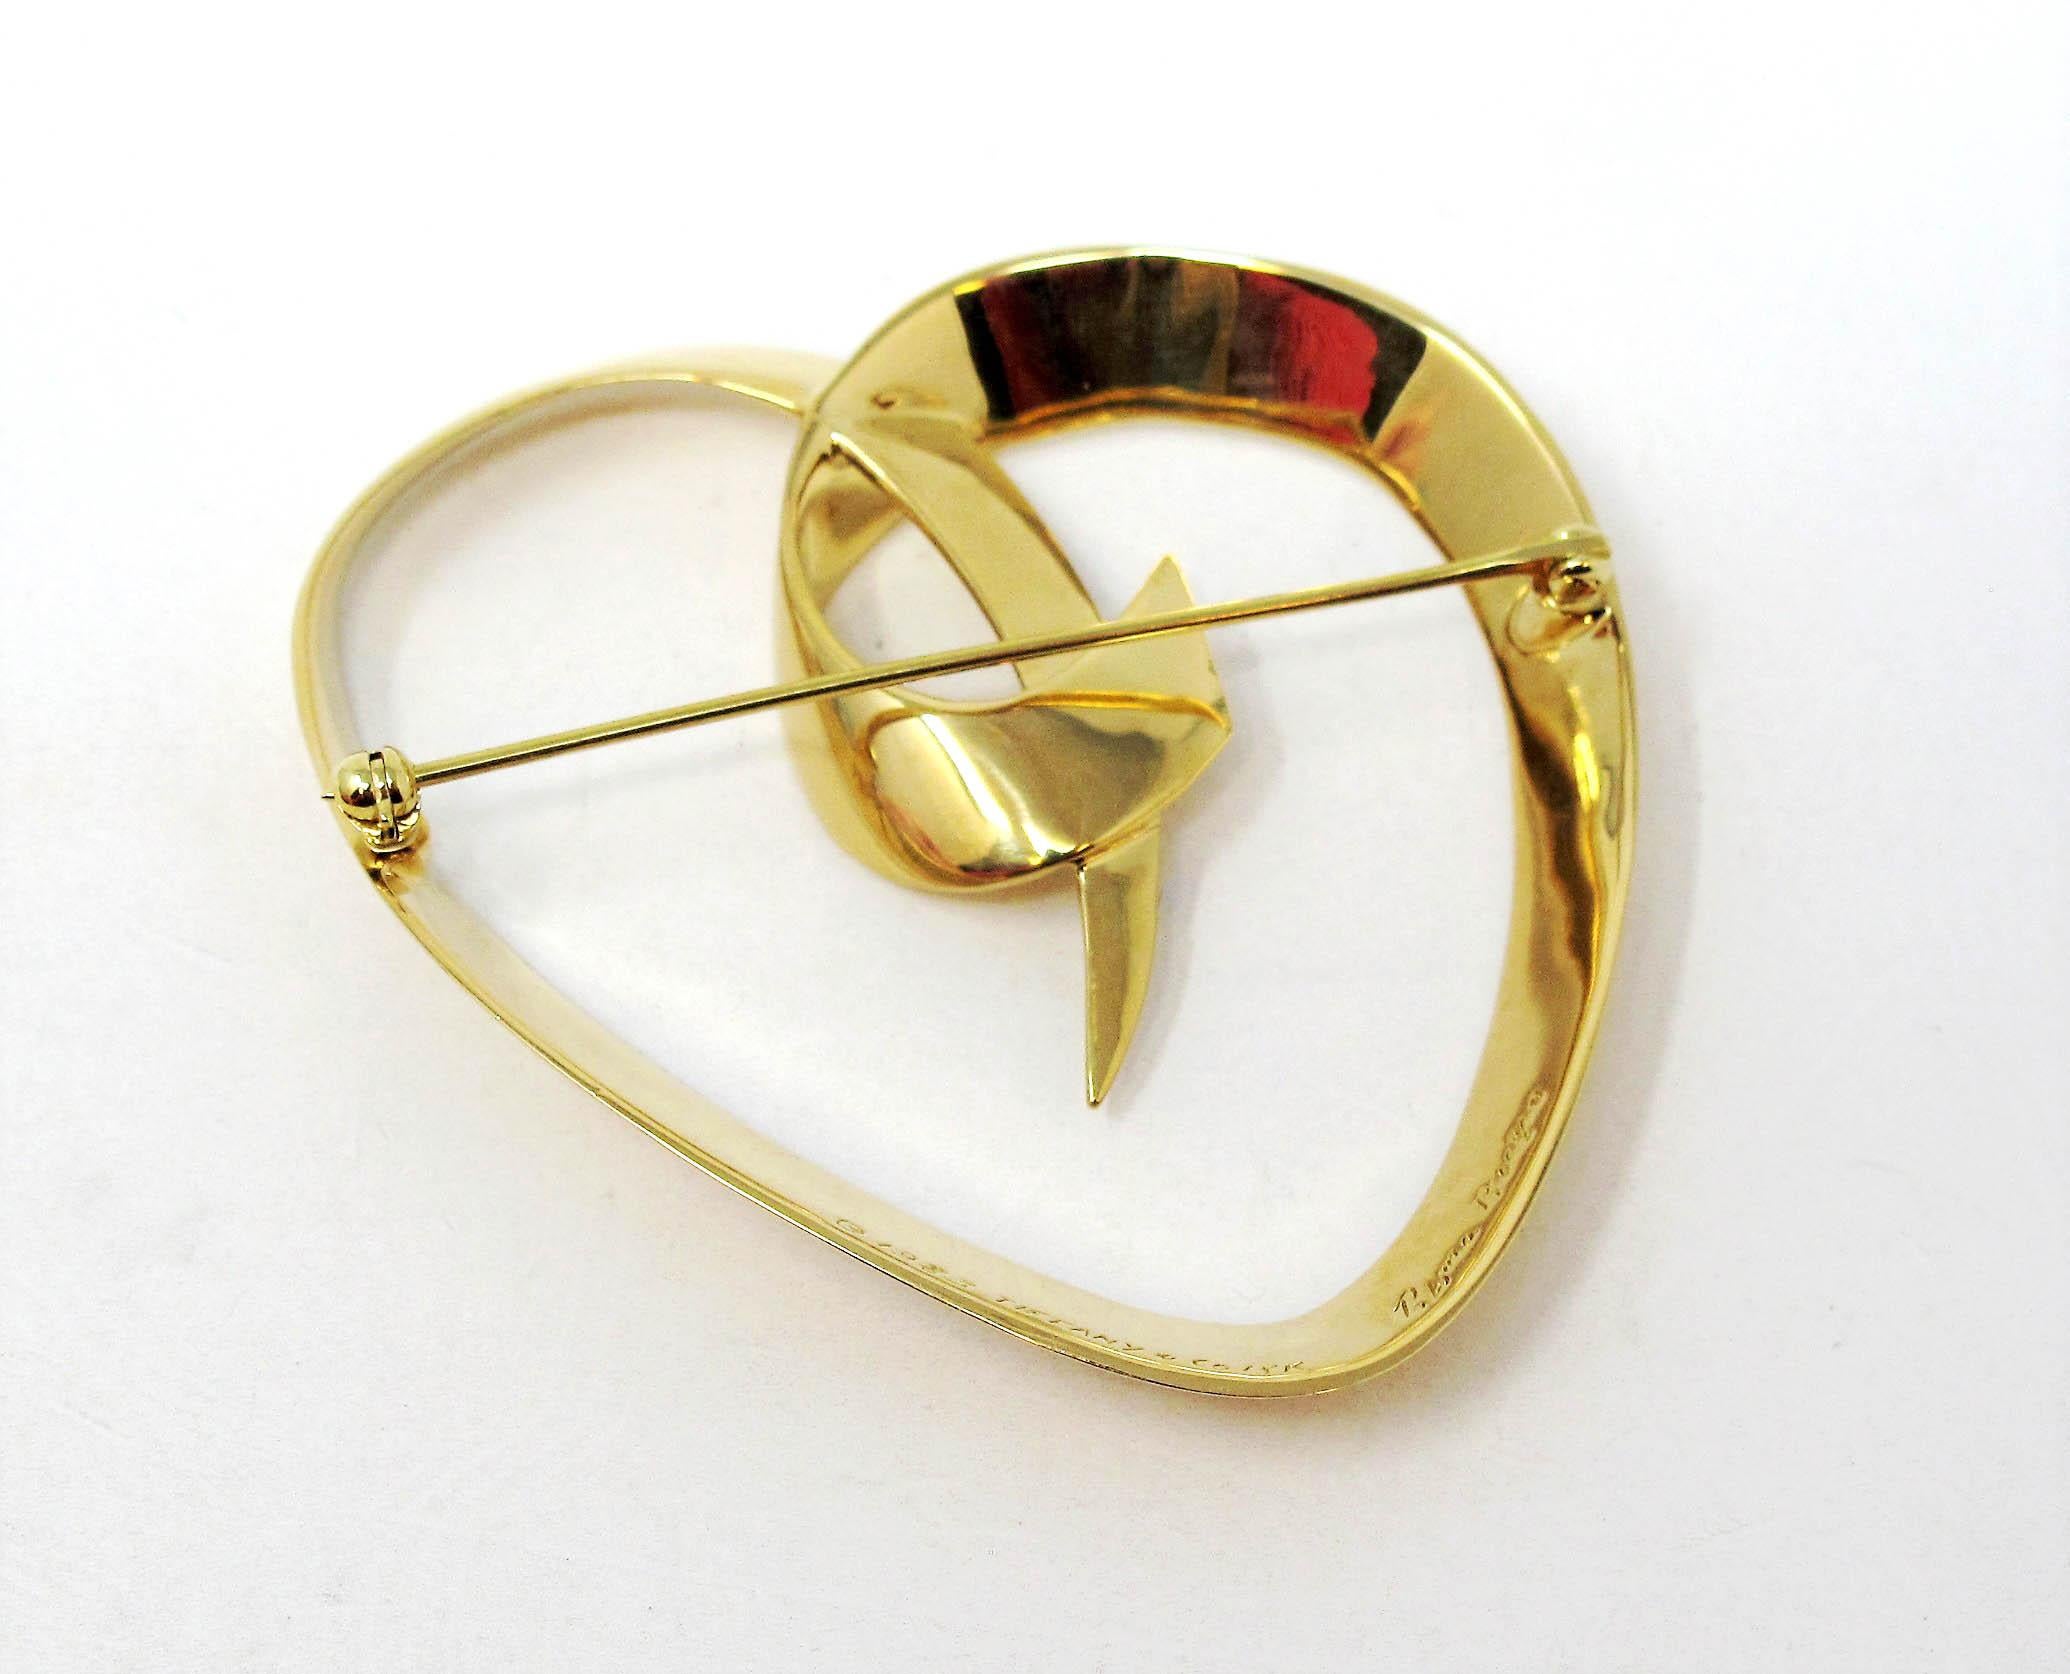 Paloma Picasso for Tiffany & Co. Large Heart Brooch Pin in 18 Karat Yellow Gold In Good Condition For Sale In Scottsdale, AZ